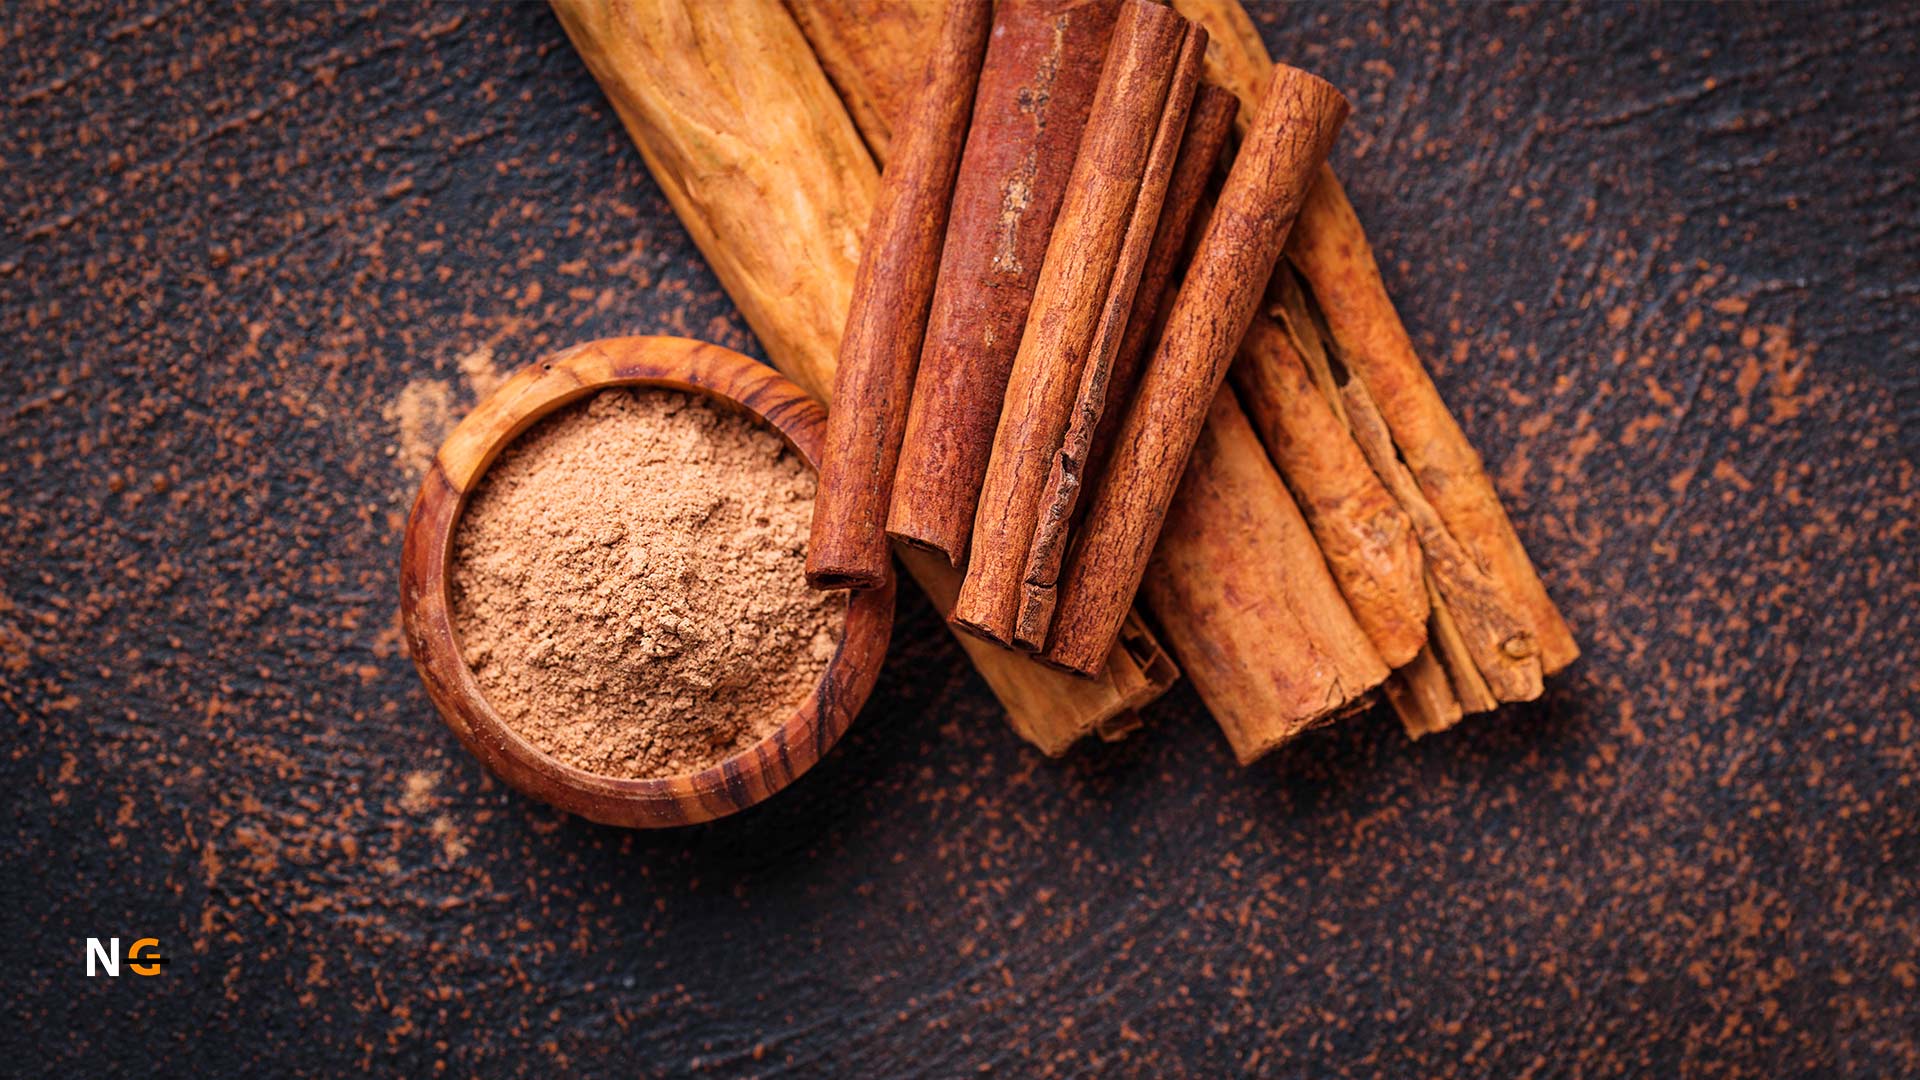 Cinnamon The Most Used Spice 